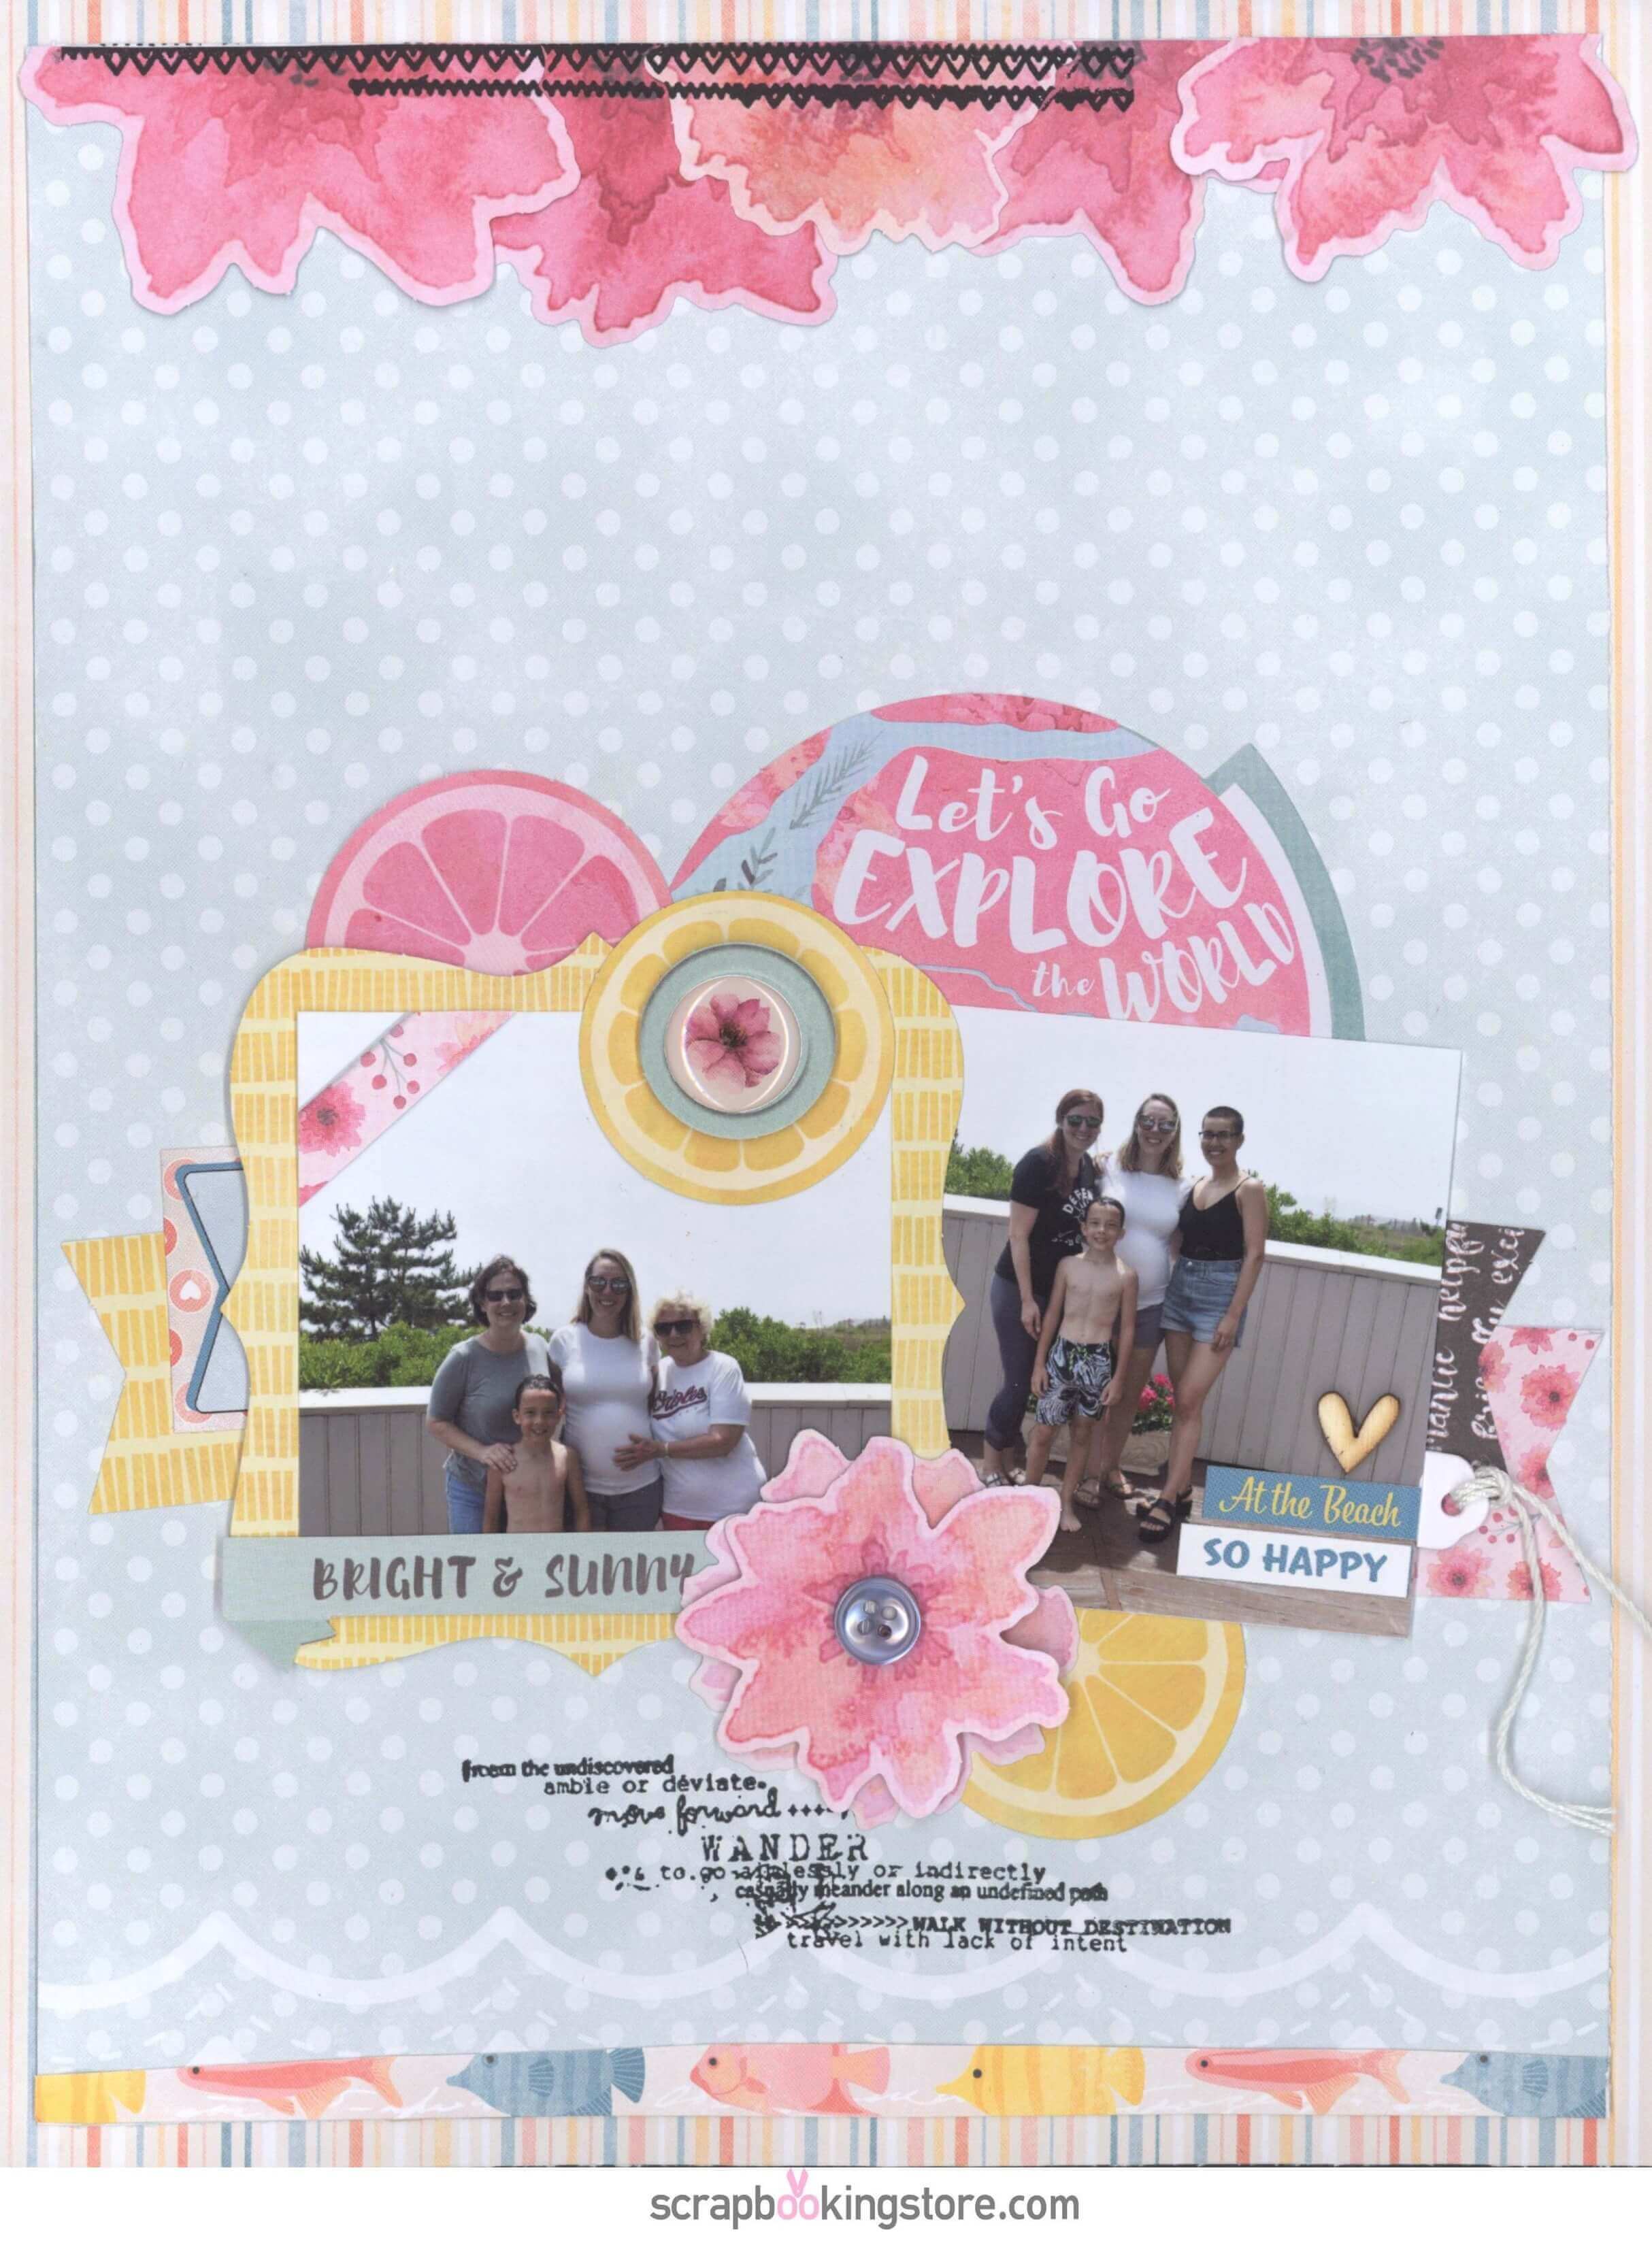 ScrapbookingStore July 2019 kit - Our Design Team members used all crafting materials from our July 2019 monthly kit called "Escape to Paradise"collection by Bo Bunny